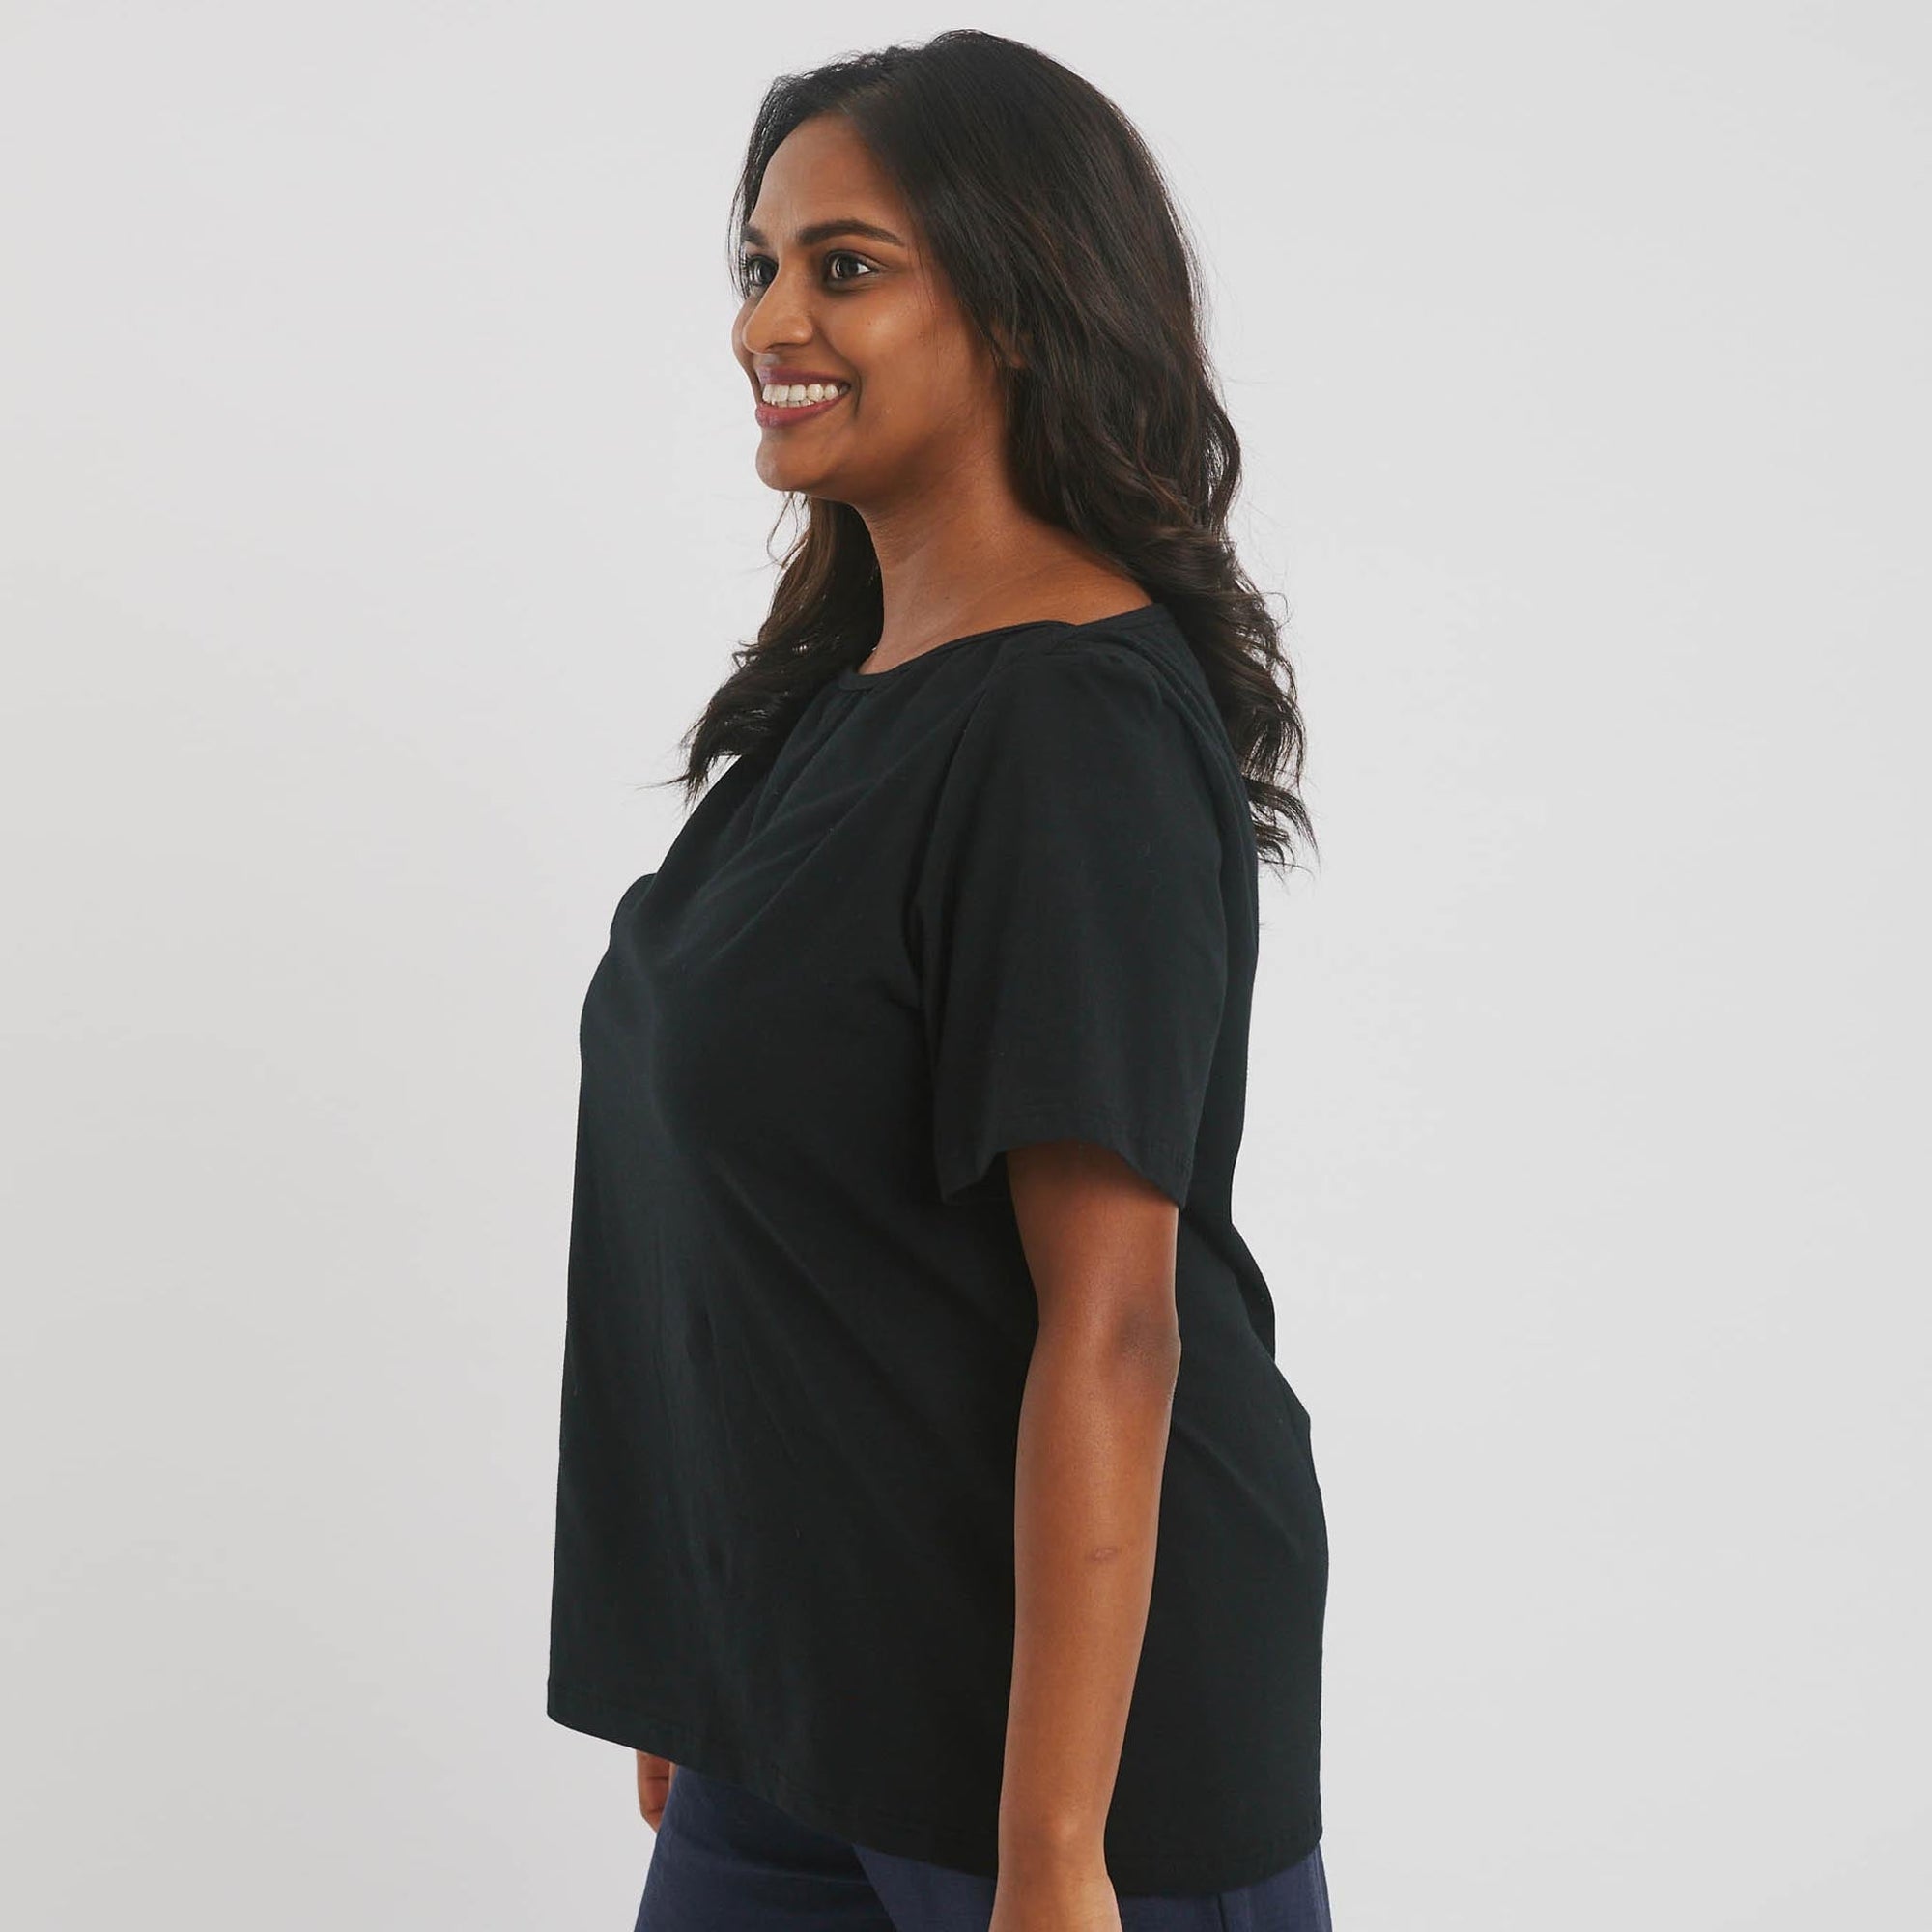 The Boat Neck Short Sleeve Top Shirts &amp; Tops - The Shapes United